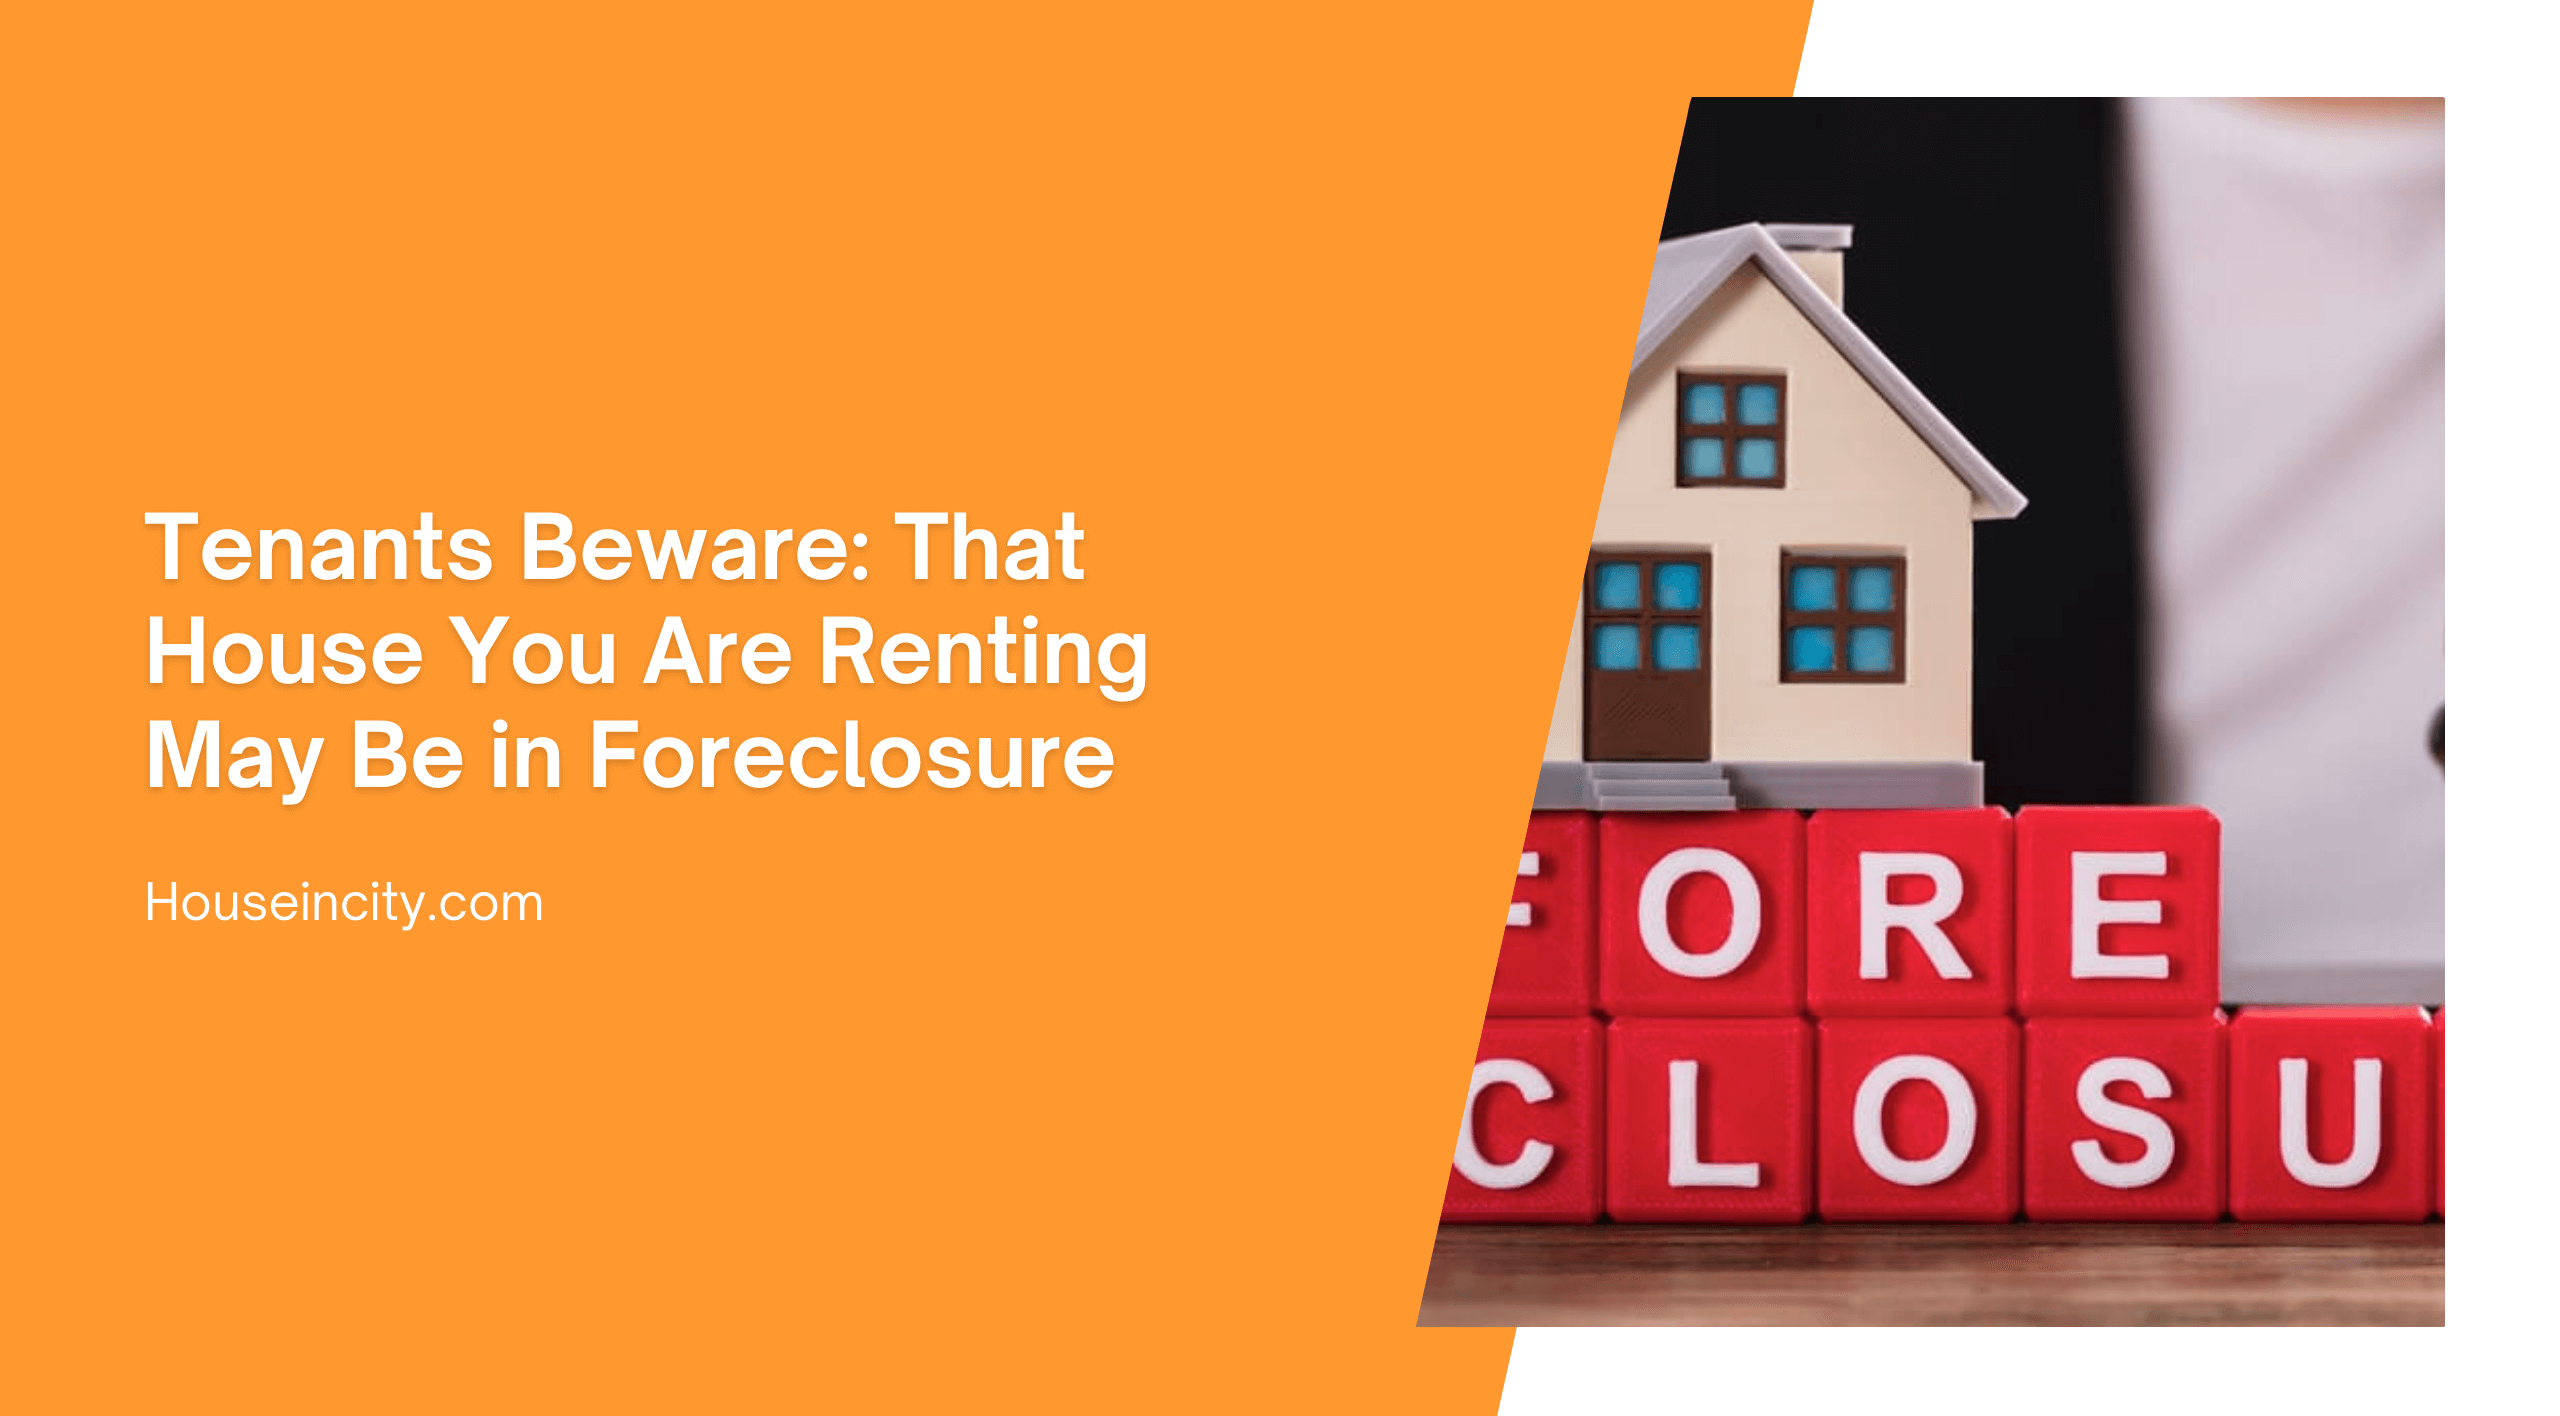 Tenants Beware: That House You Are Renting May Be in Foreclosure